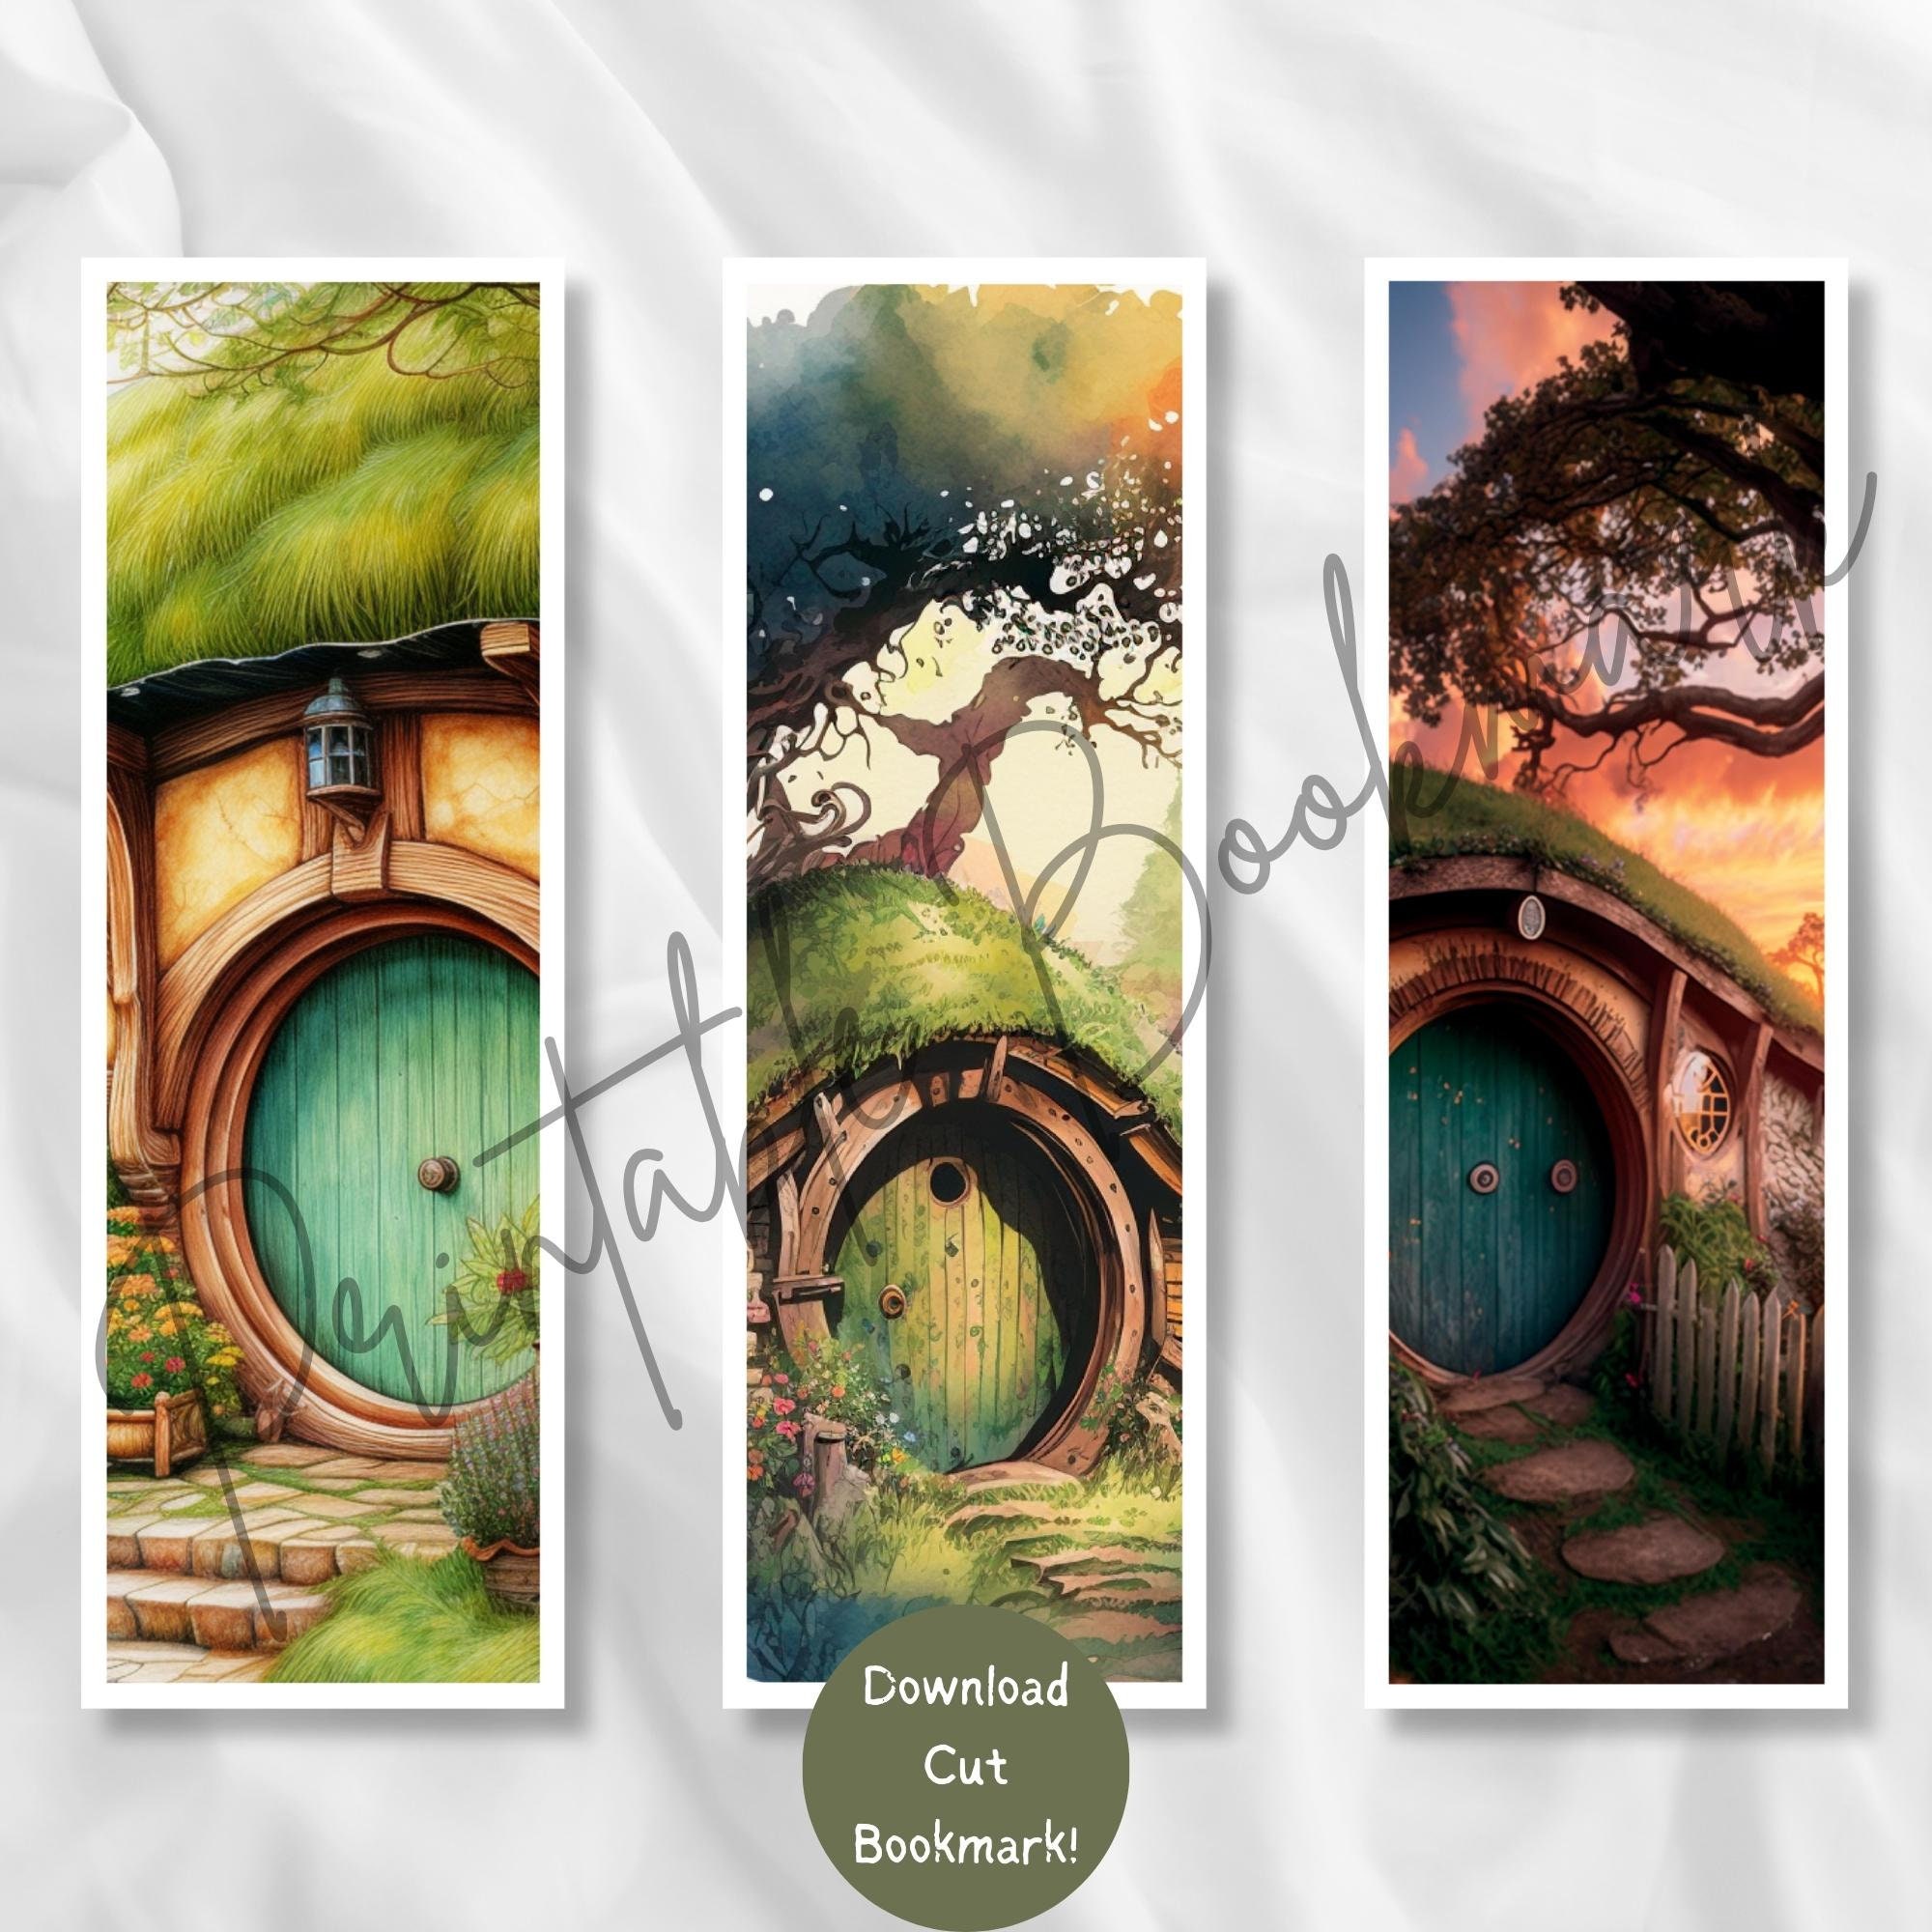 Rustic Hobbit Hole of the Shire Map Hobbiton Art Decor, Lord of the Ring  Hobbit Hole Art Poster, Decor, Wall Art, Gift, Instant Download 